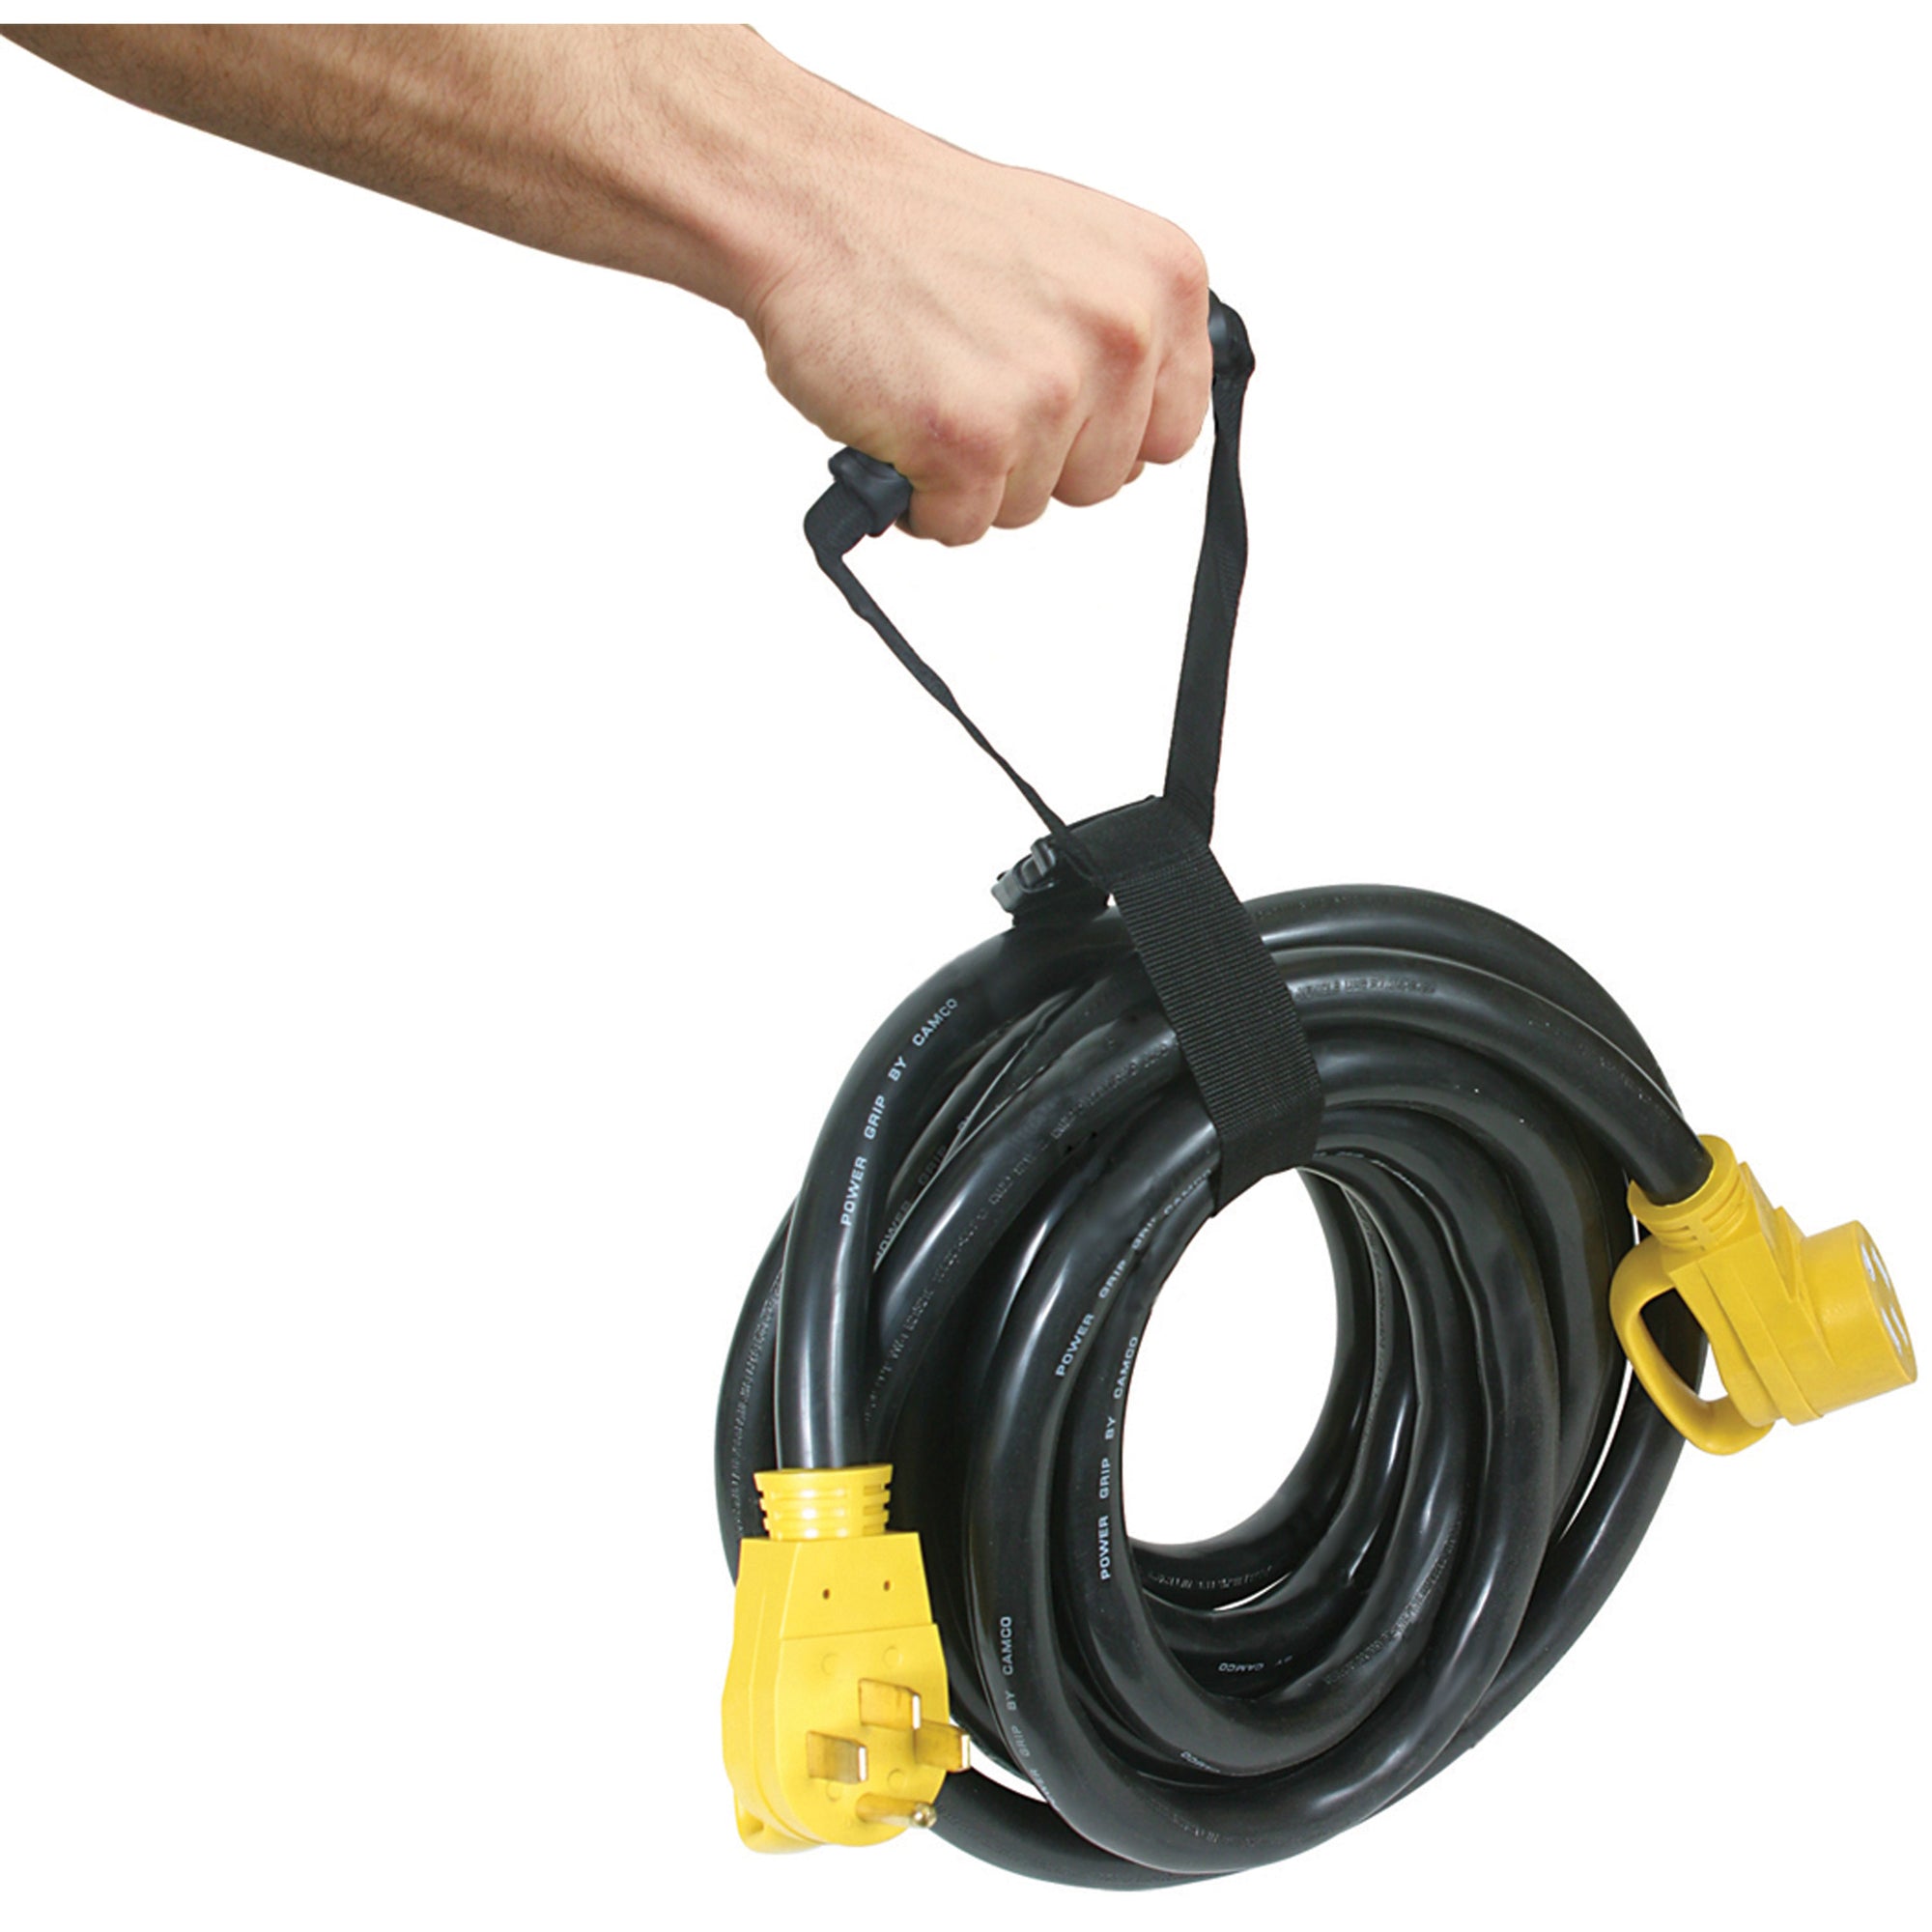 Camco 55001 Electrical Storage Cord Handle